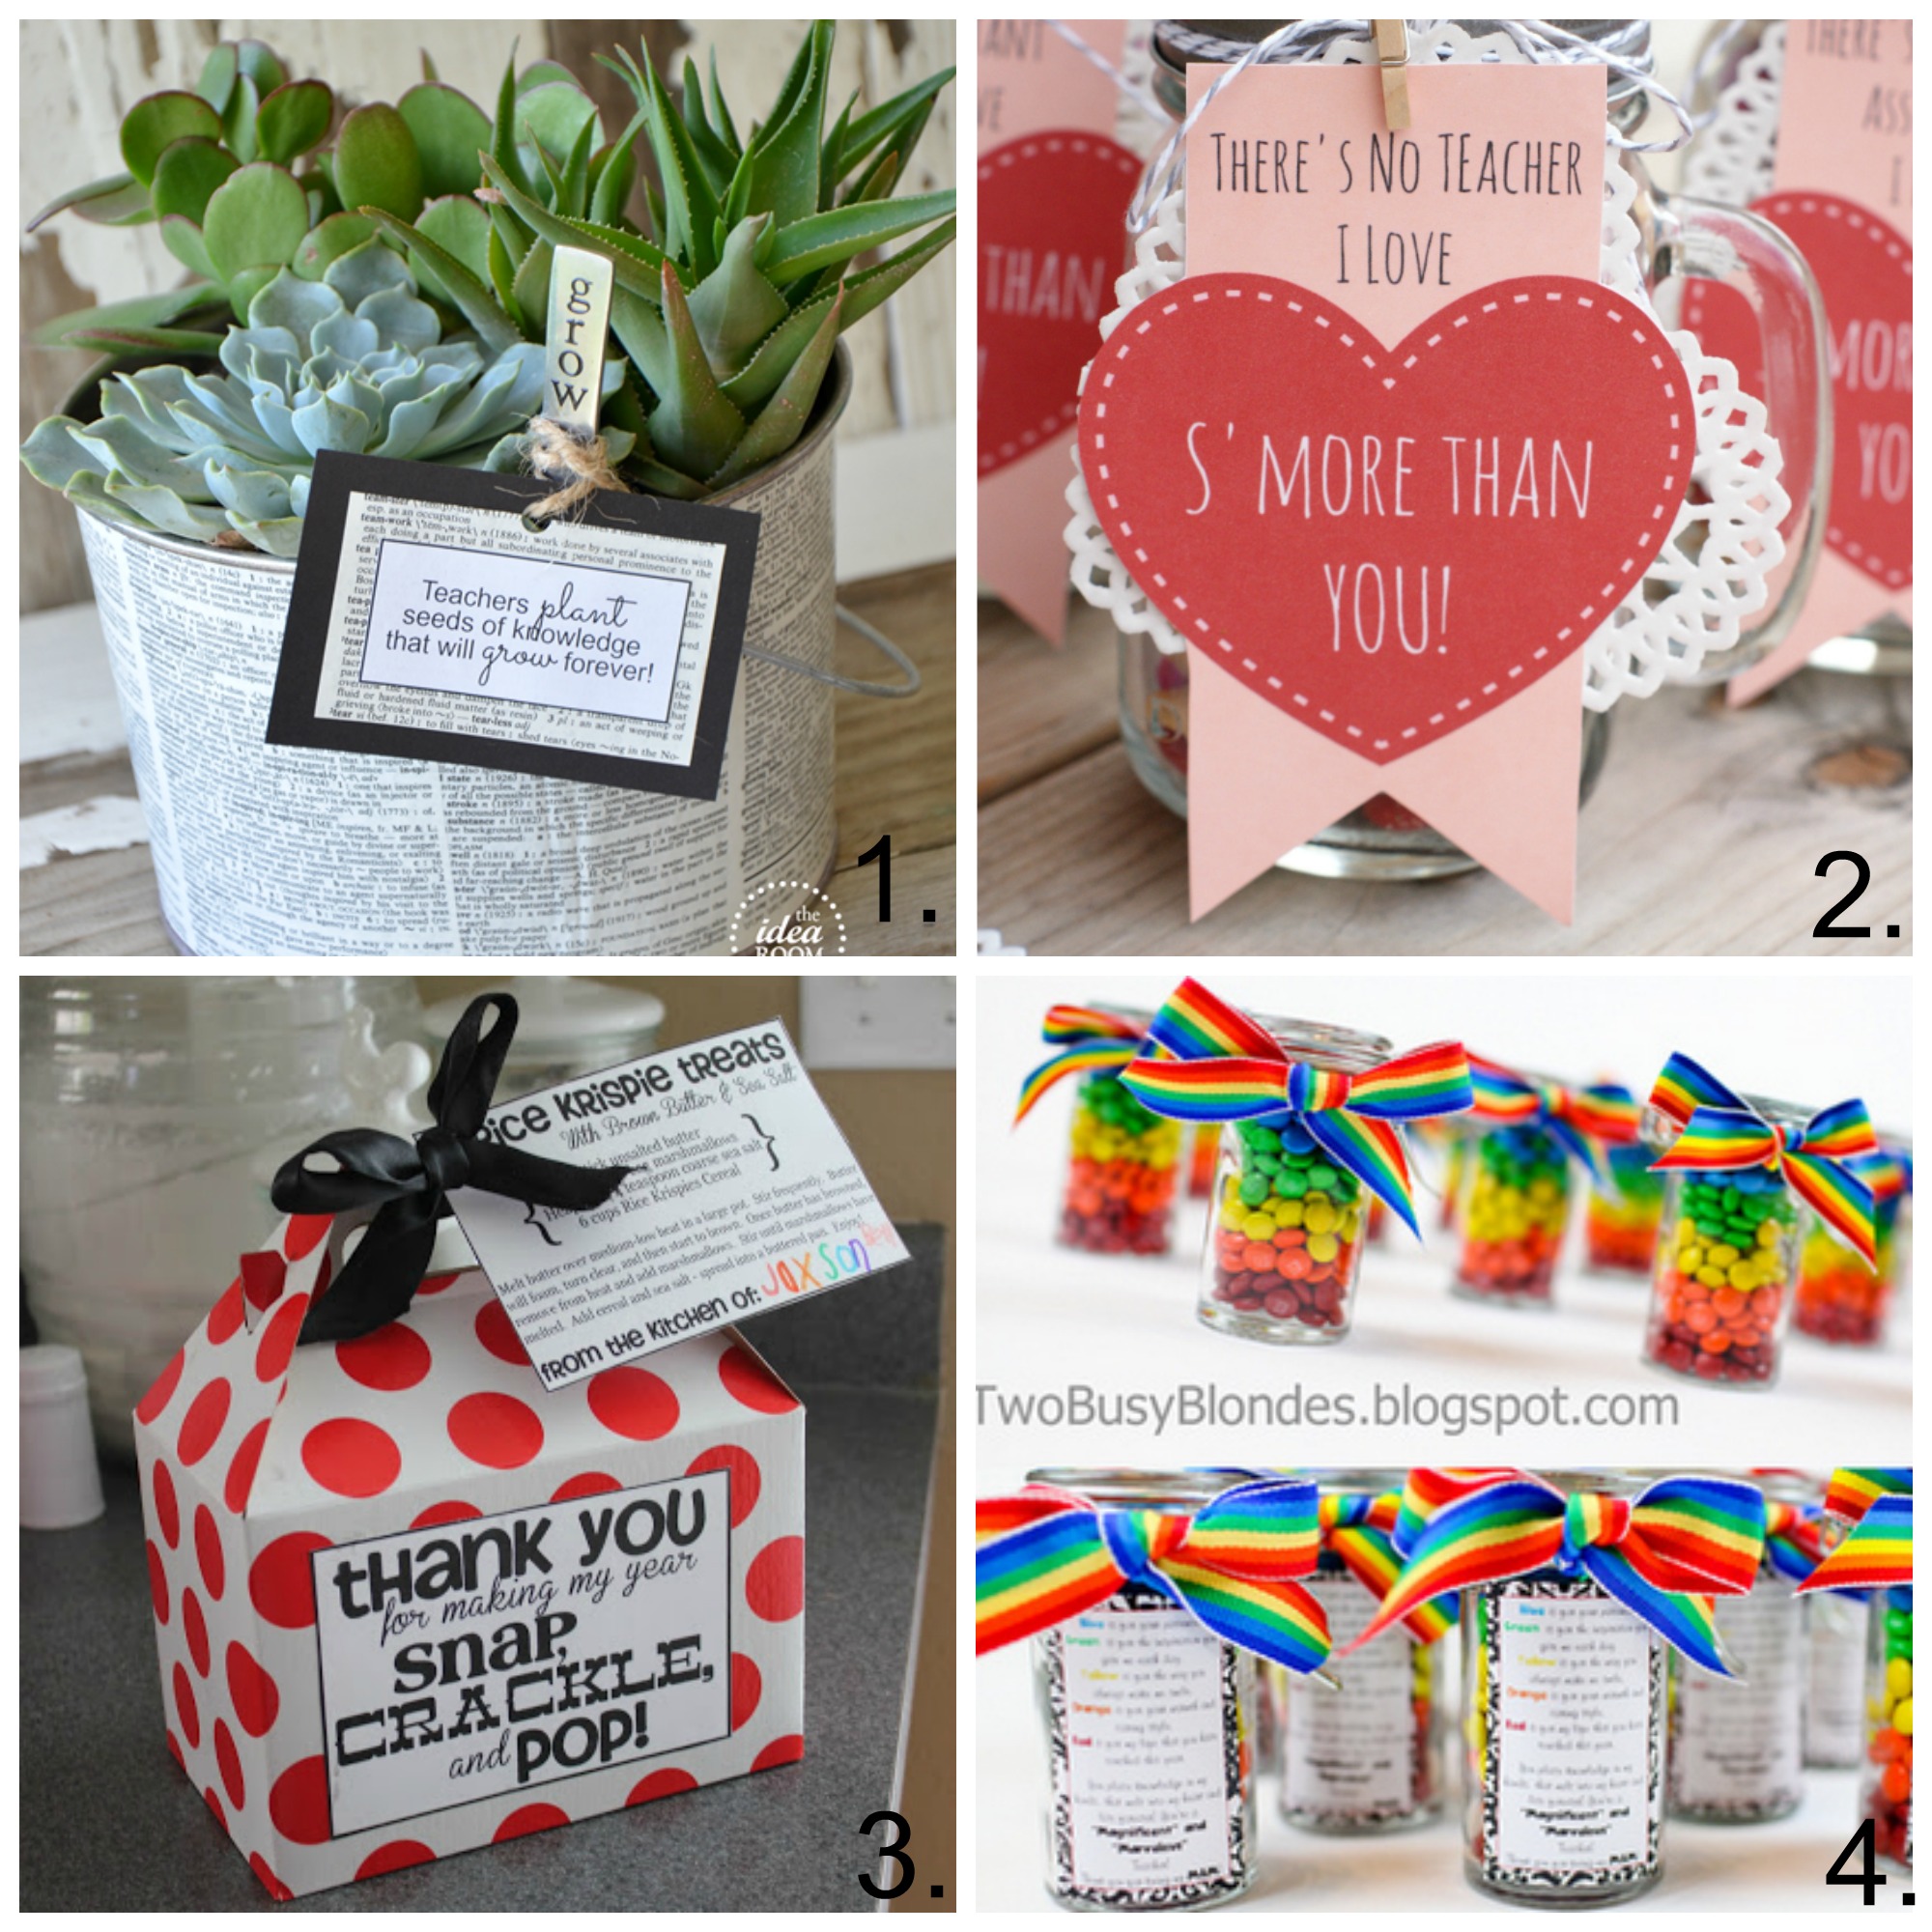 25 Awesome Teacher Appreciation Gift Ideas - My Frugal Adventures